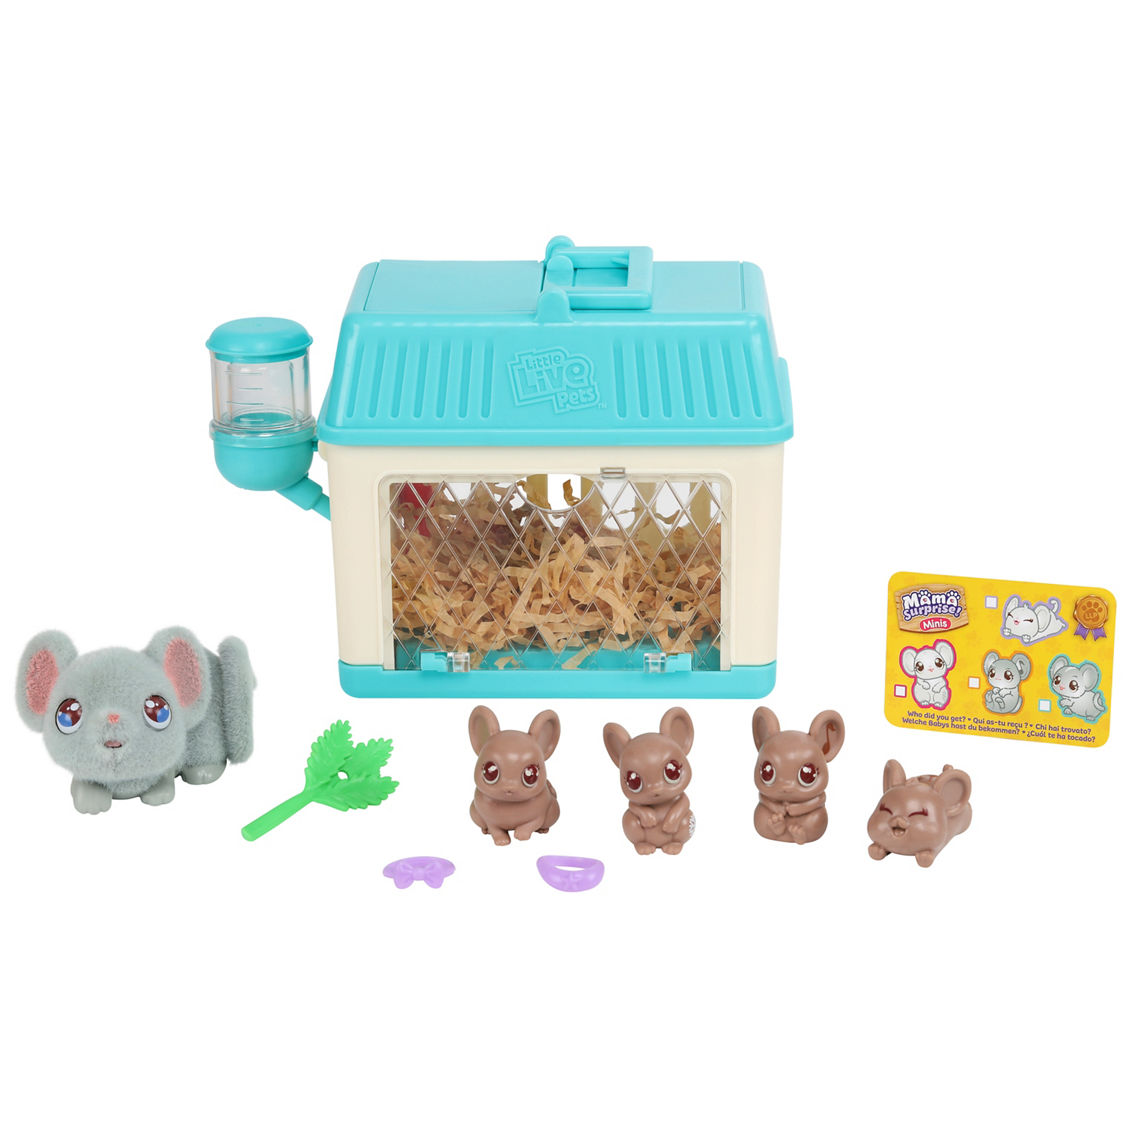 Moose Toys Little Live Pets Mama Surprise Minis Lil' Mouse Playset S2 - Image 3 of 3